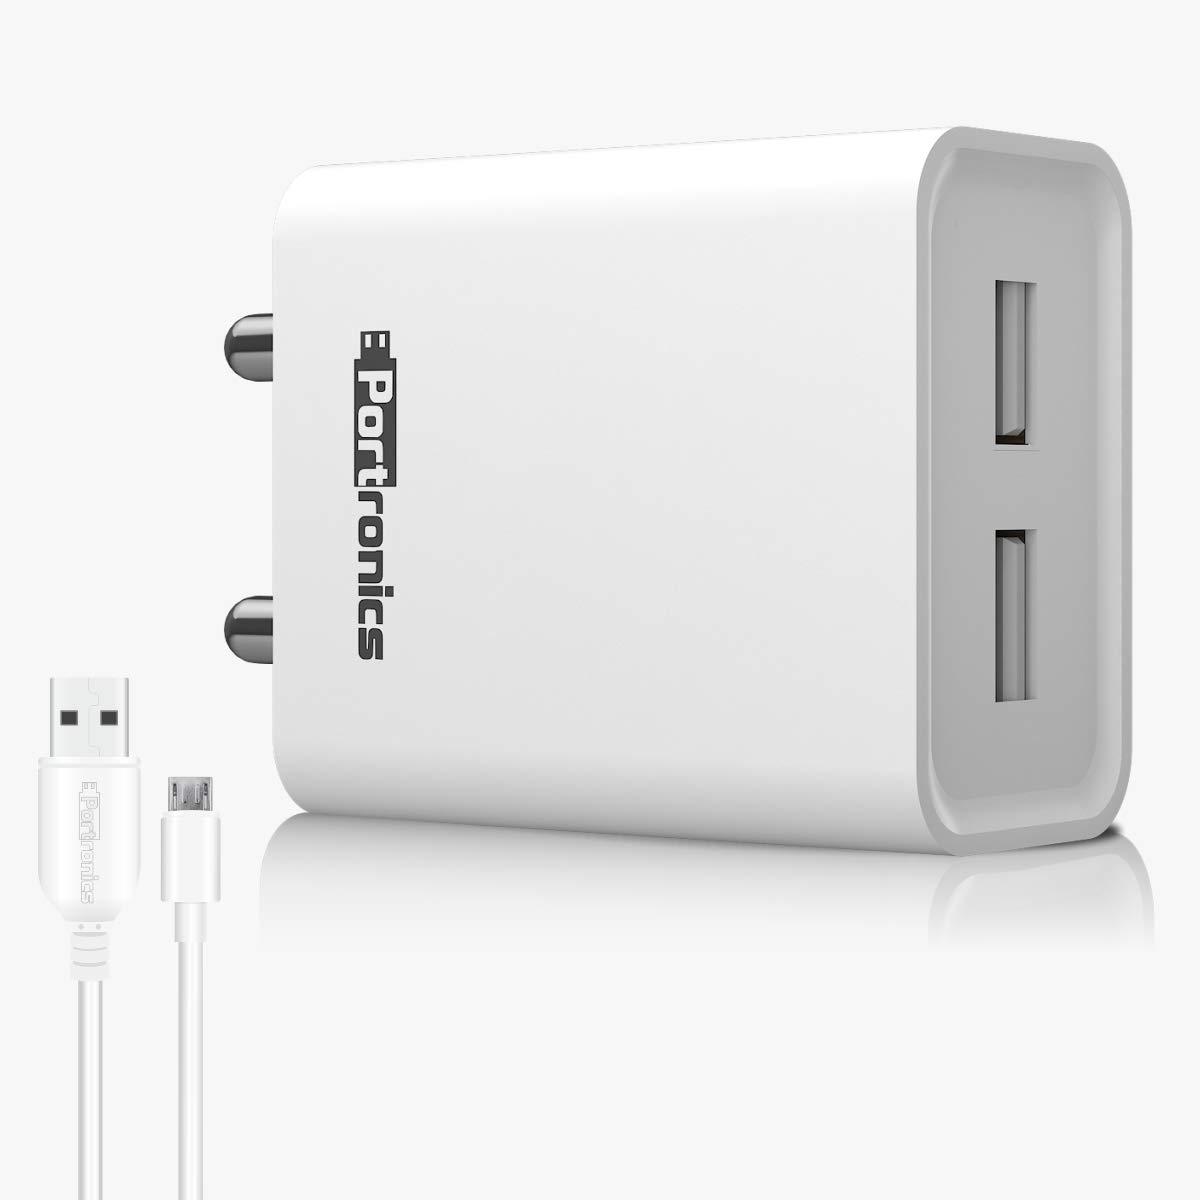 ibond Adapto 66 2.4A 12w Dual USB Port 5V/2.4A Wall Charger, Comes with 1M Micro USB Cable, USB Wall Charger Adapter for iPhone 11/Xs/XS Max/XR/X/8/7/6/Plus, iPad Pro/Air 2/Mini 3/Mini 4, Samsung S4/S5 and More (White)